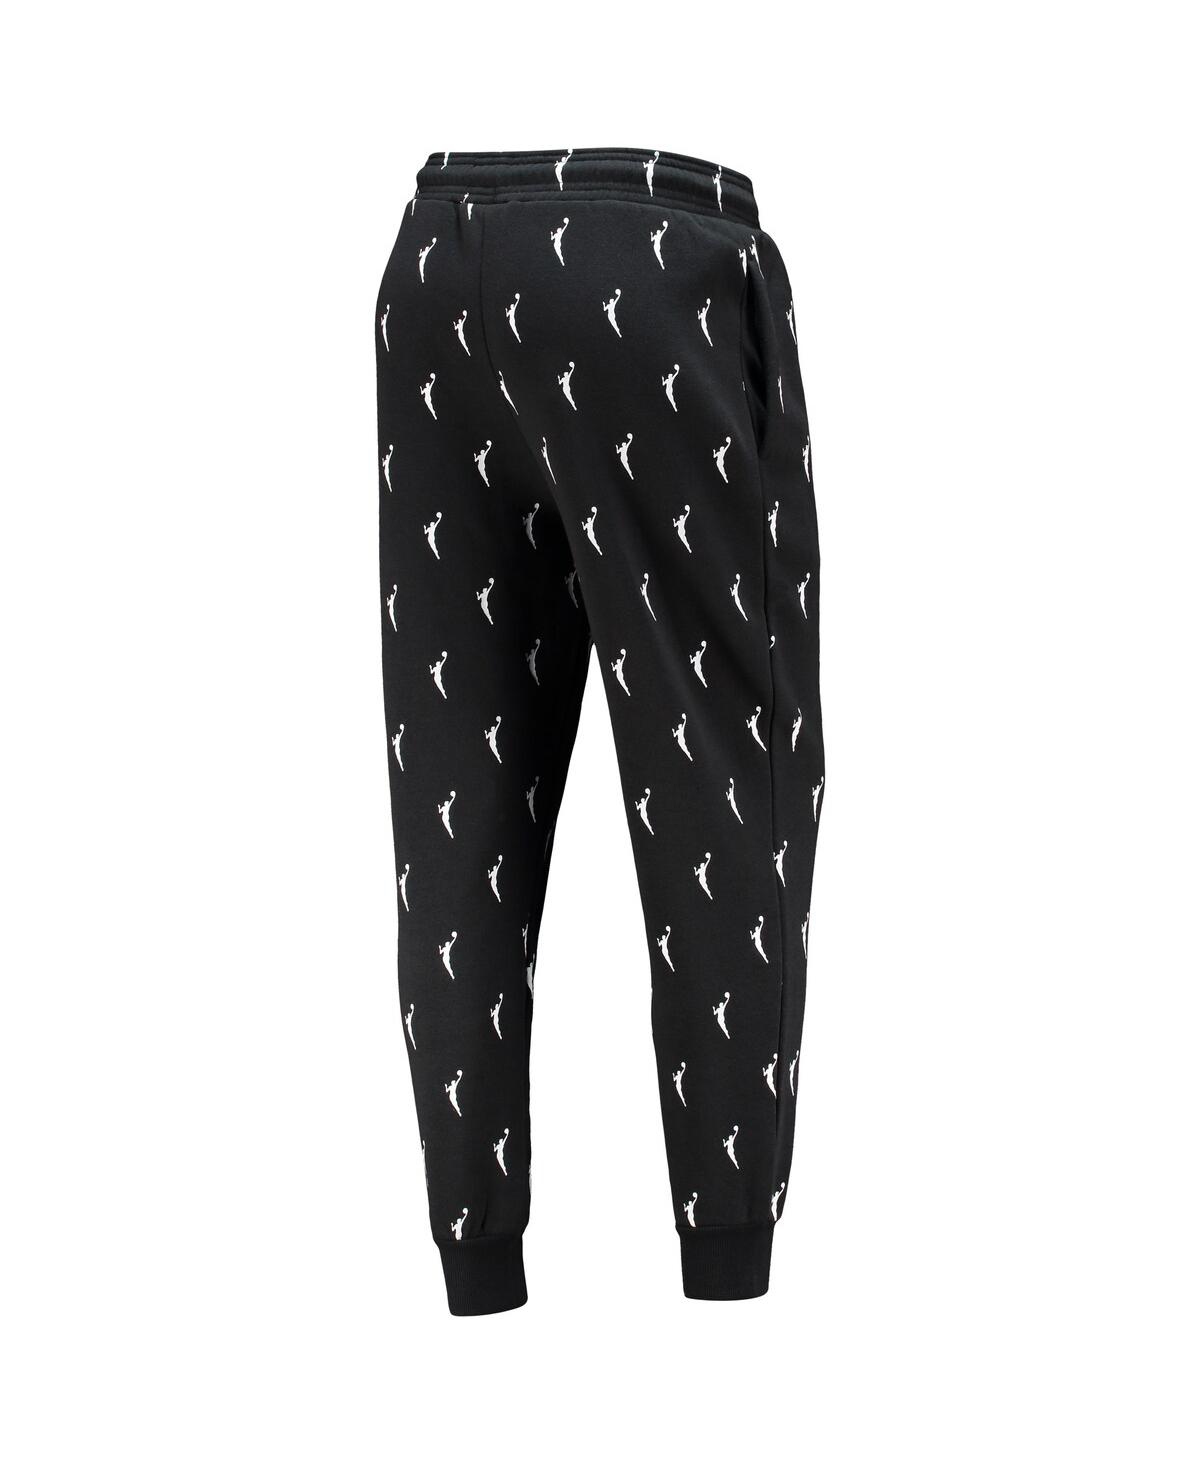 Shop The Wild Collective Women's  Black Wnba All Over Print Joggers